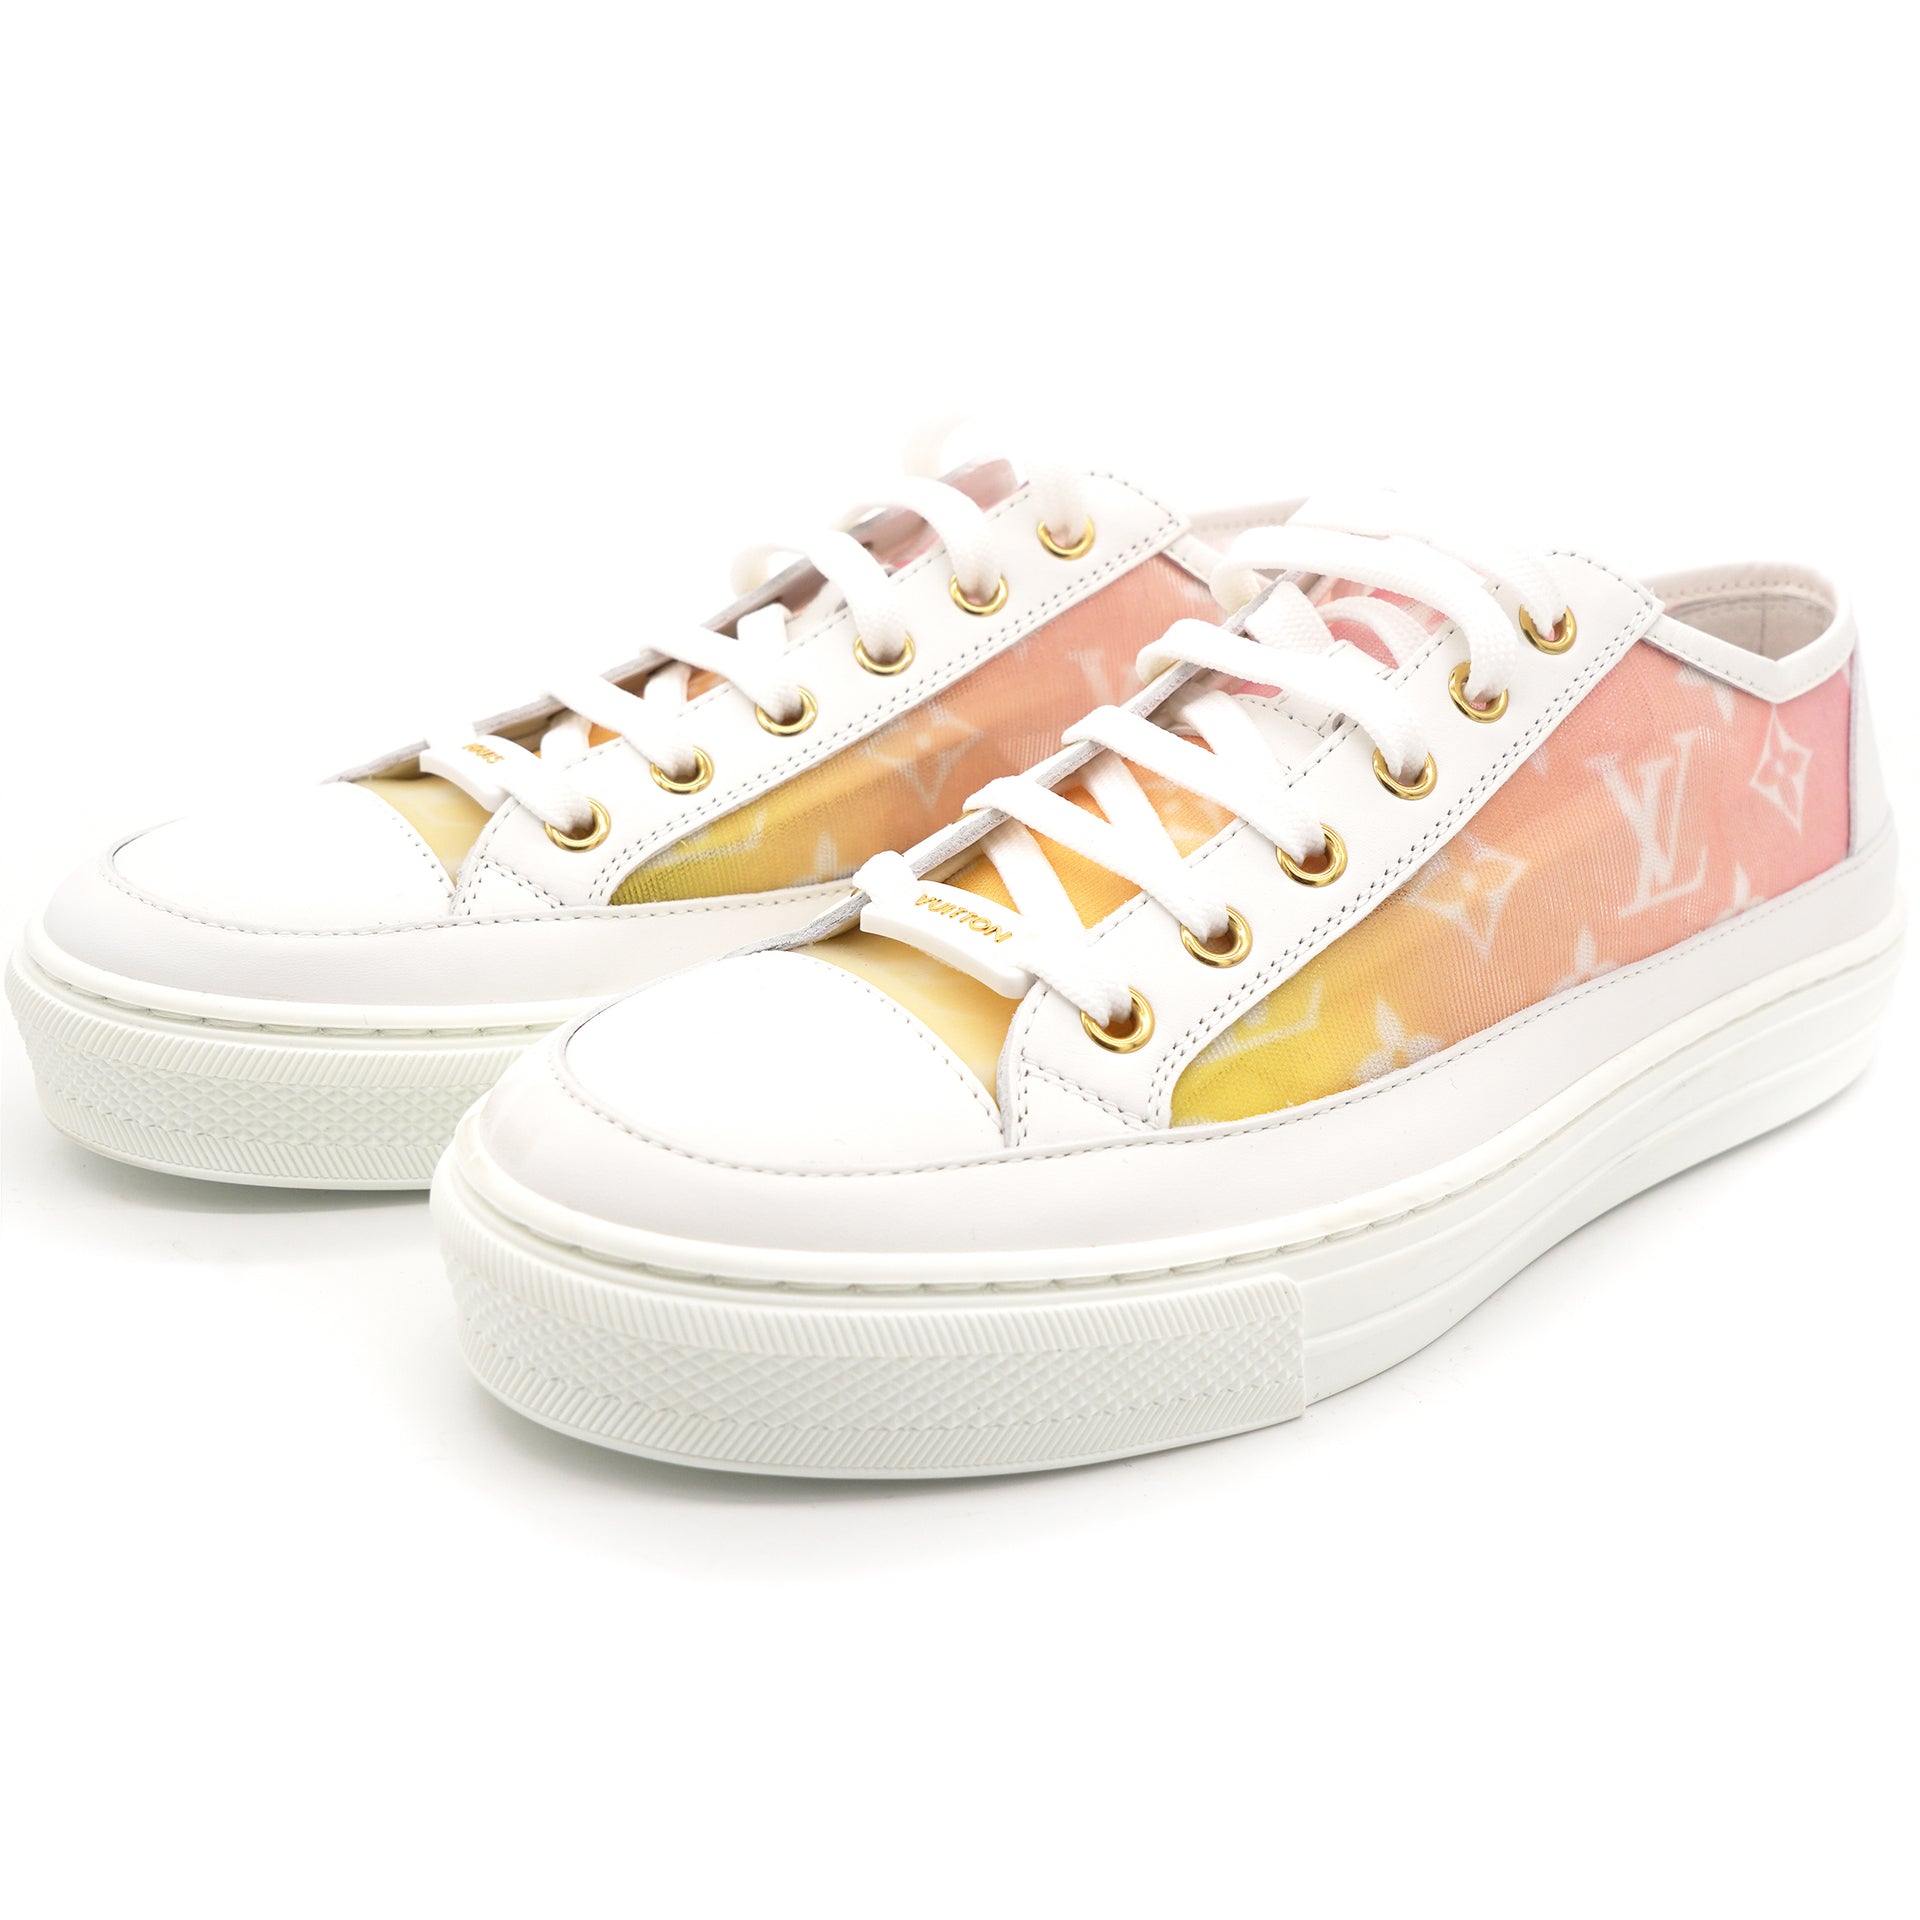 Louis Vuitton White/Pink Mesh and Leather Stellar Sneaker Mules